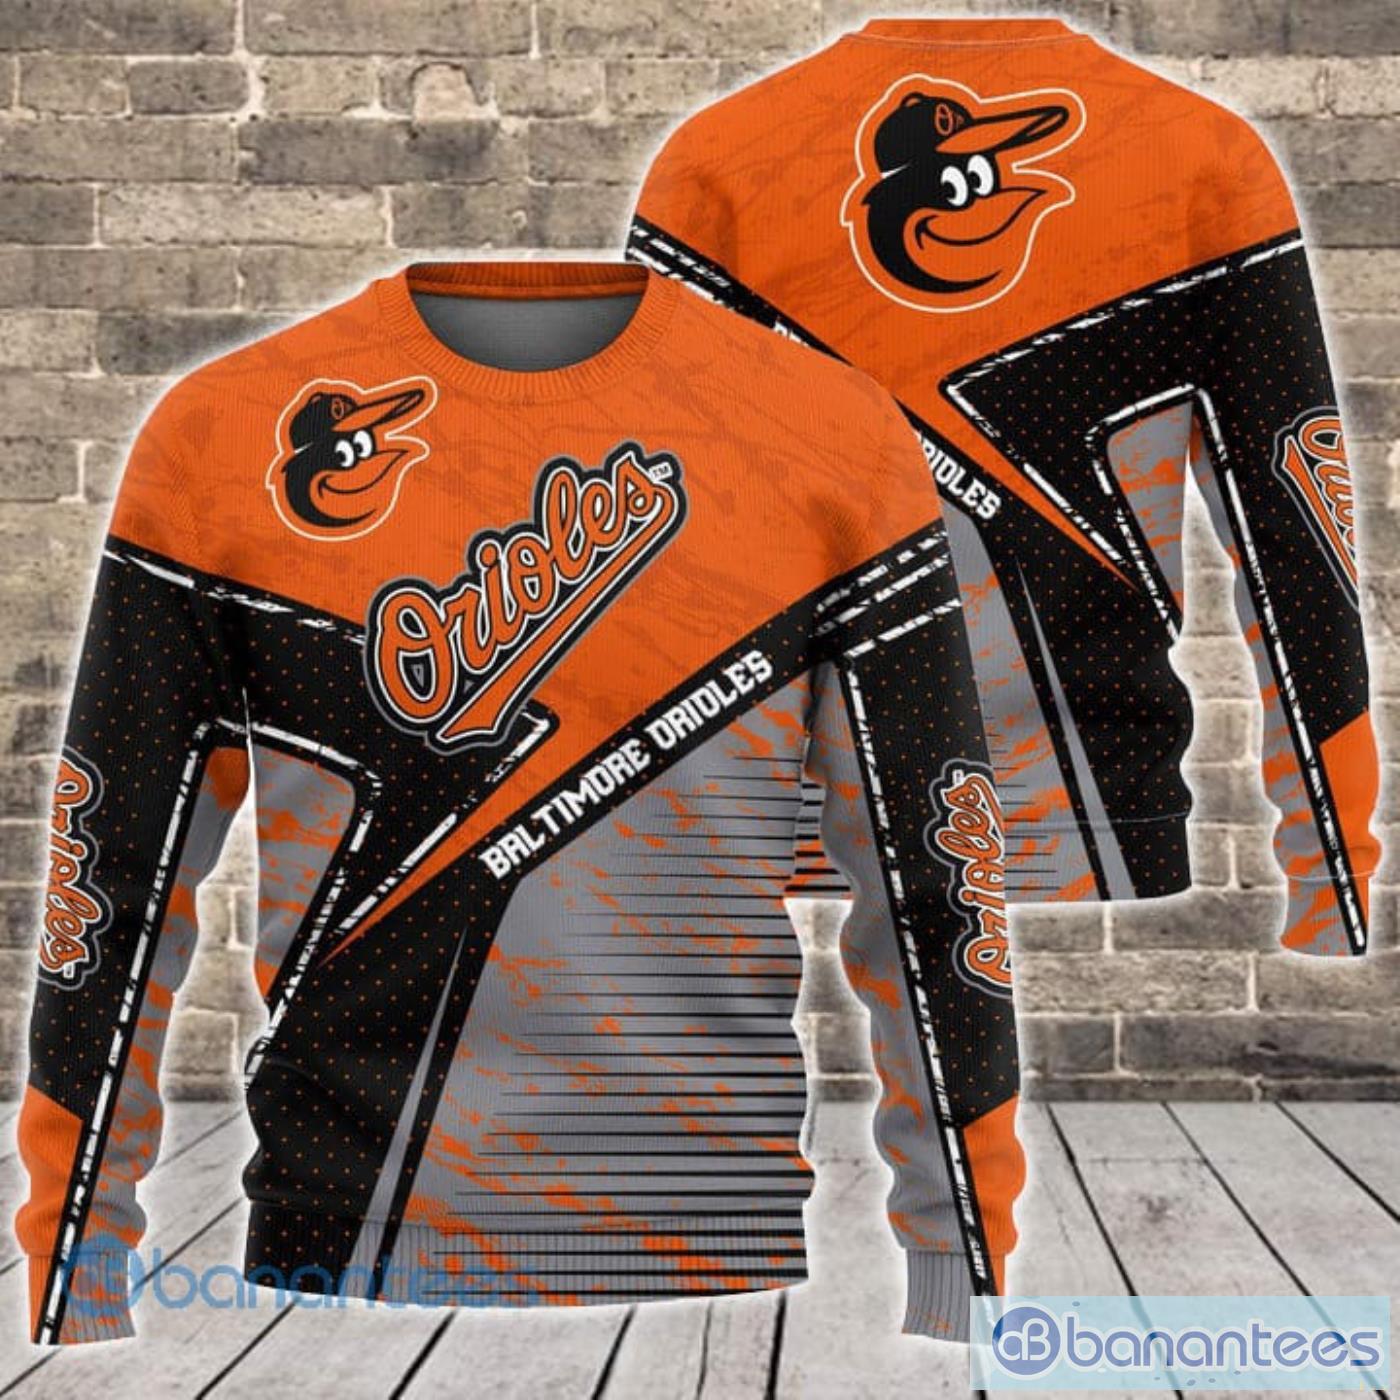 Baltimore Orioles Mlb All Over Printed 3D Shirt For Fans - Banantees